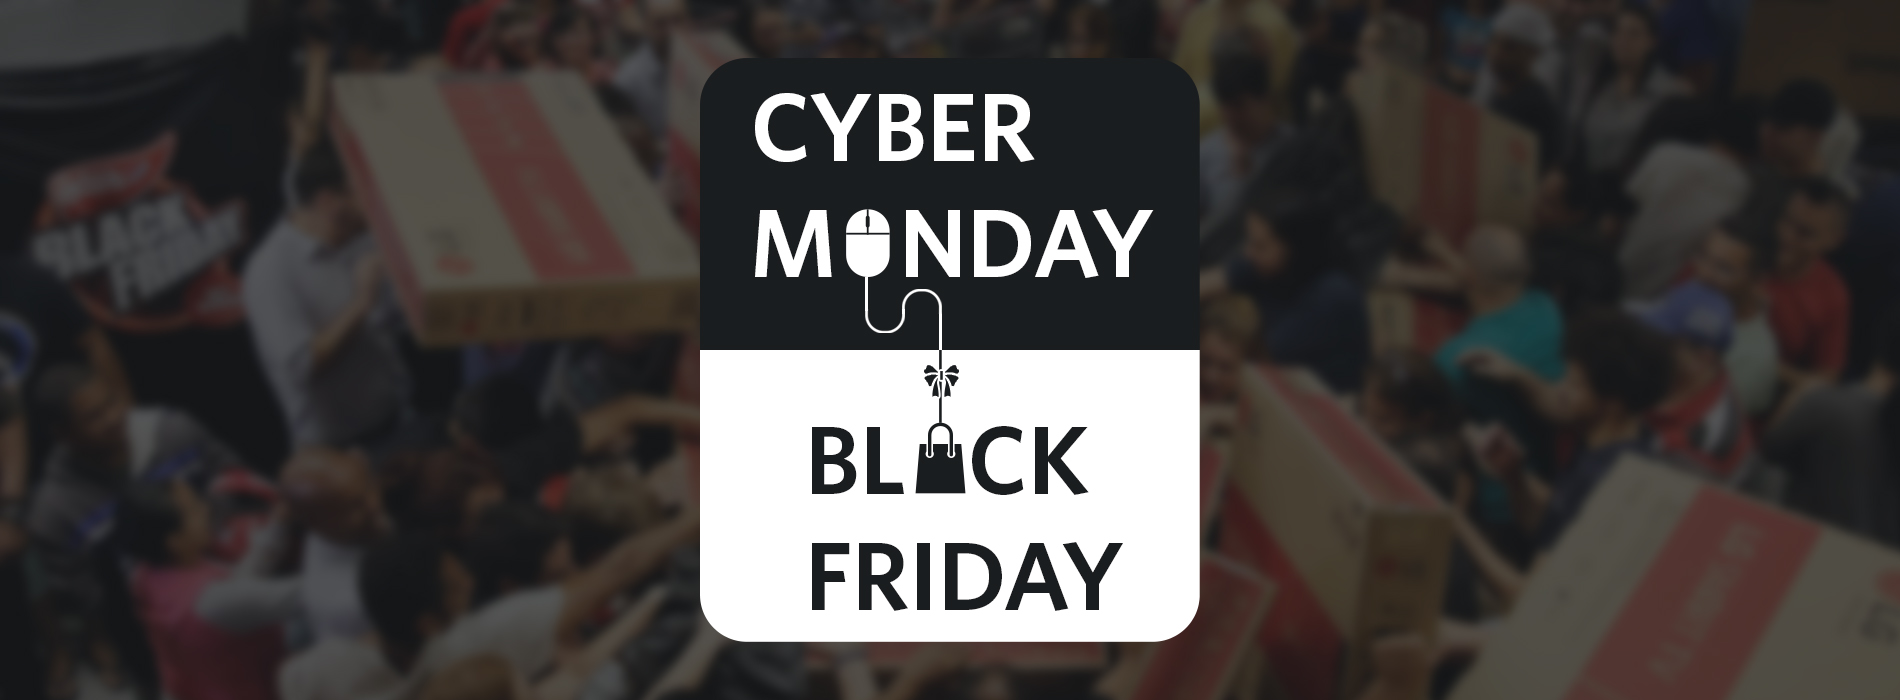 What Are The Benefits of Black Friday?